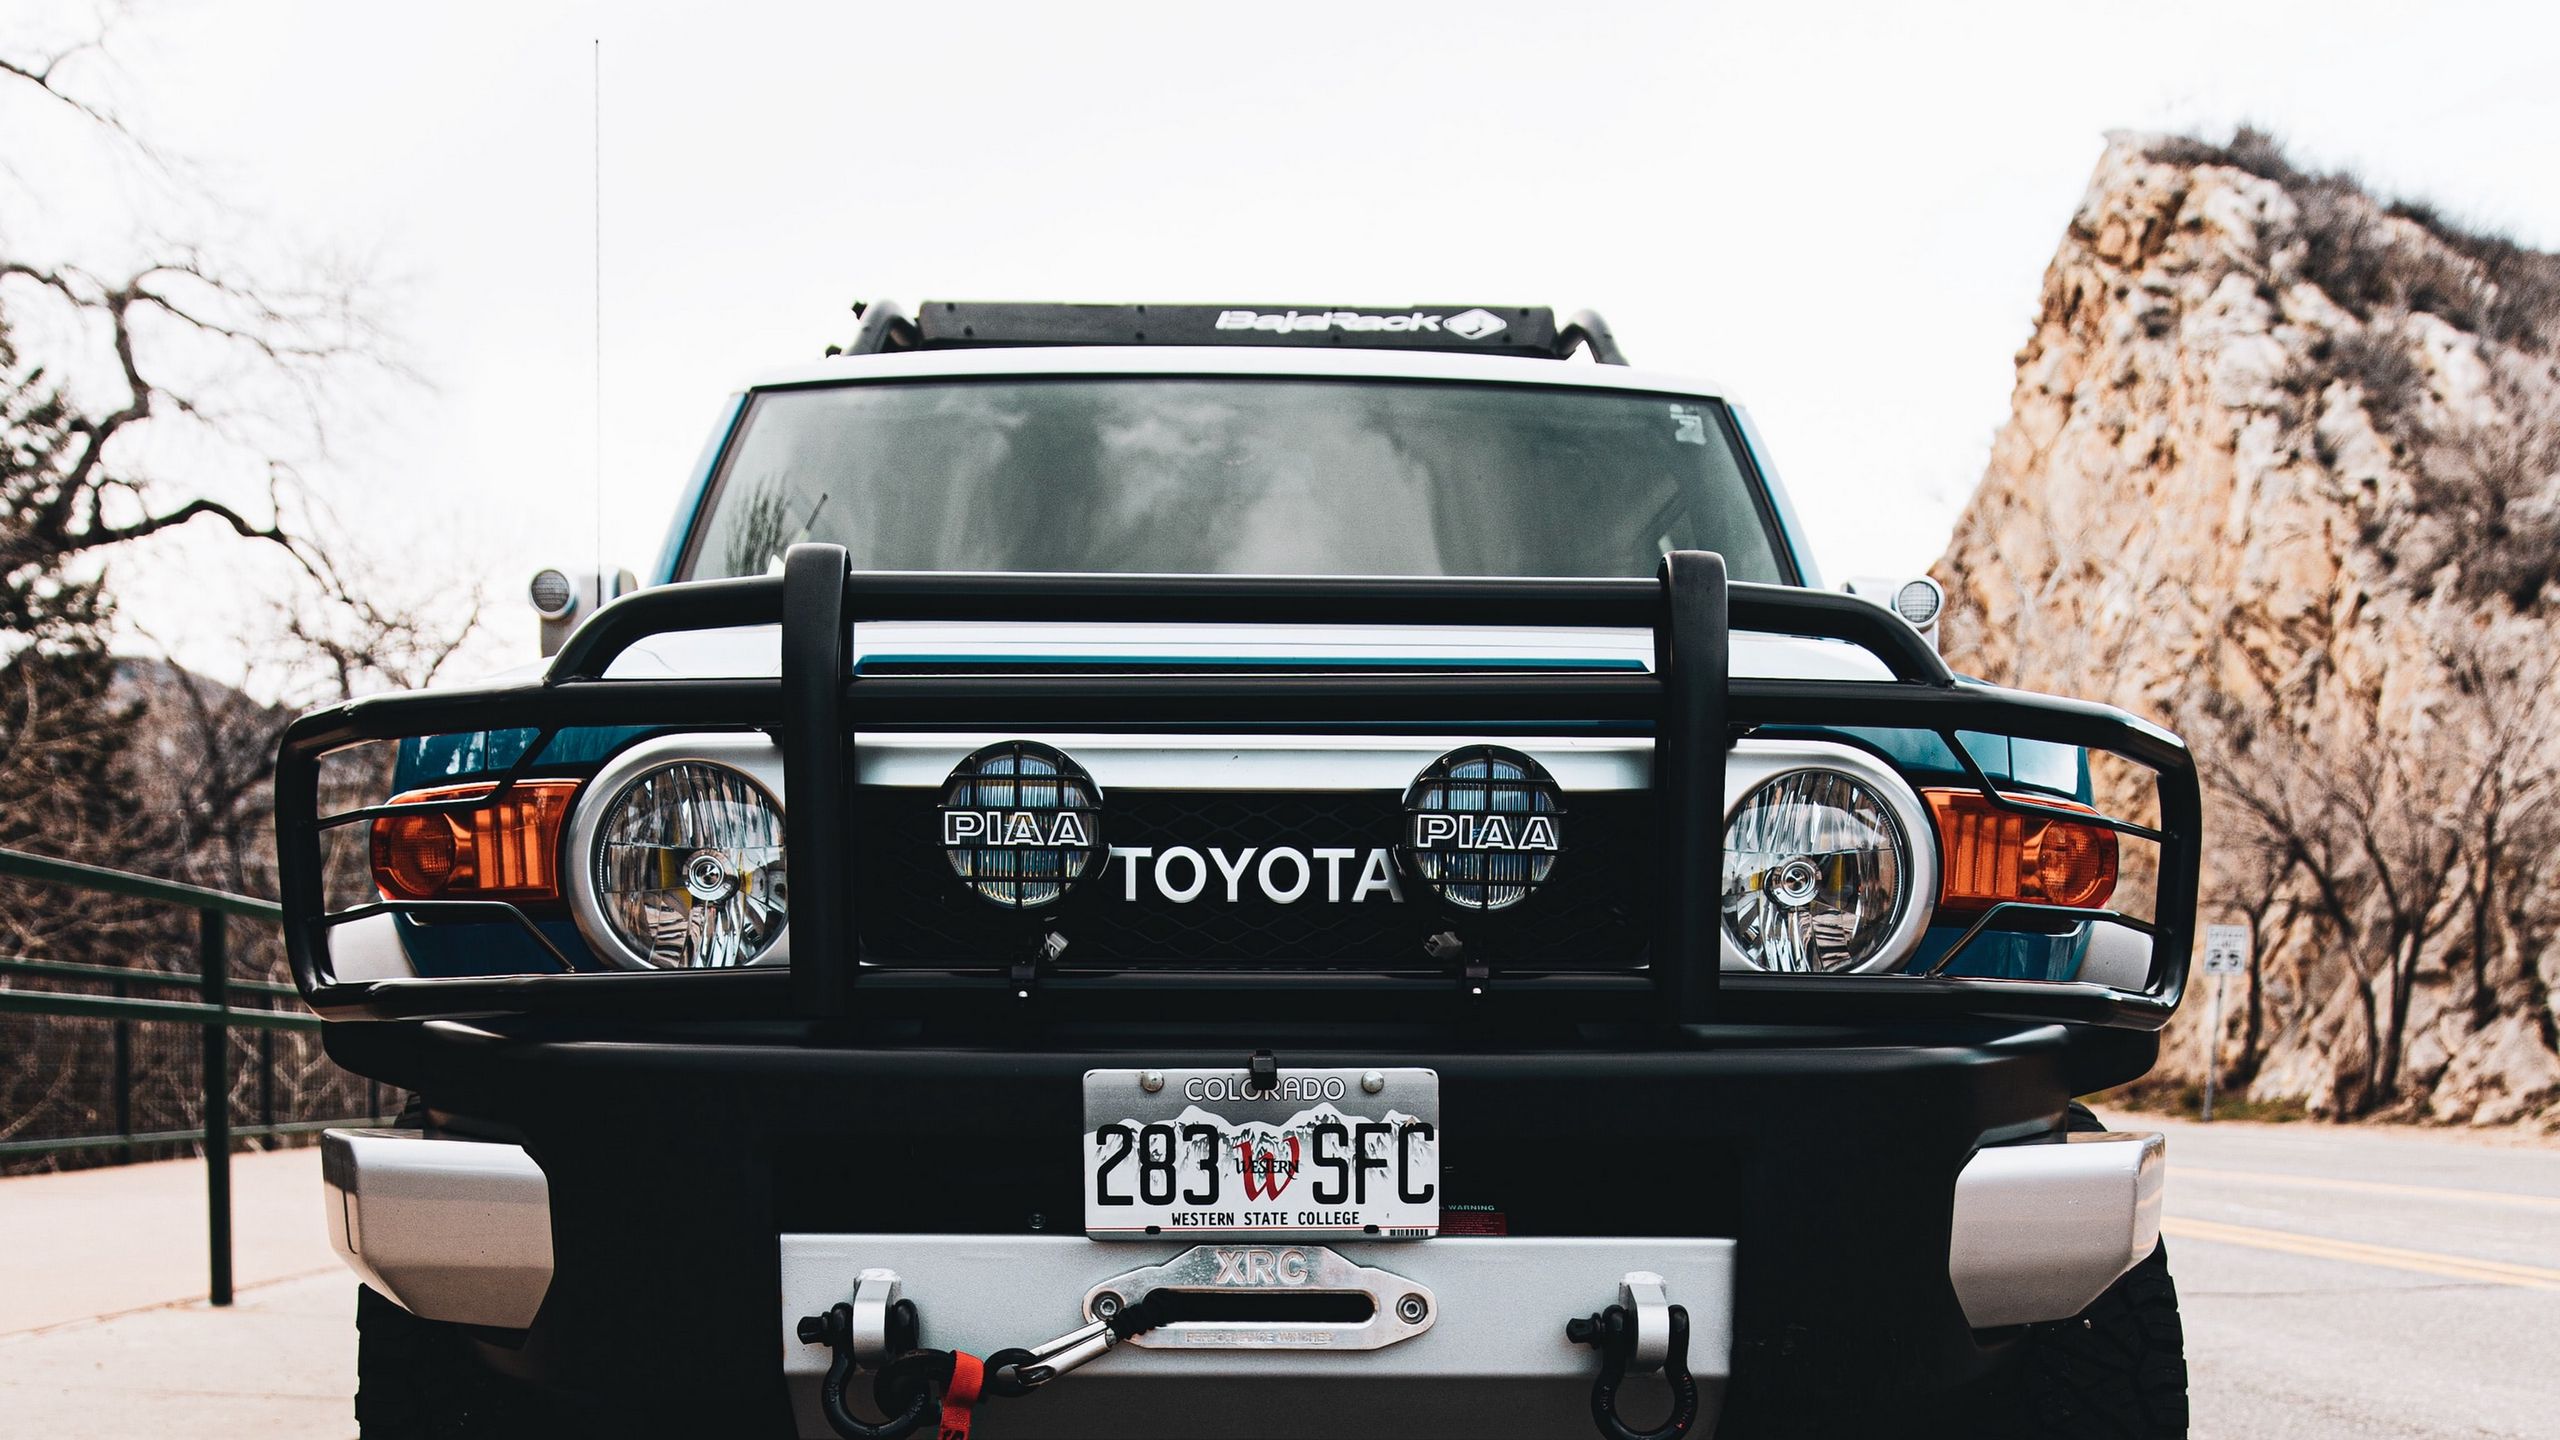 toyota_suv_front_view_168076_2560x1440.jpg